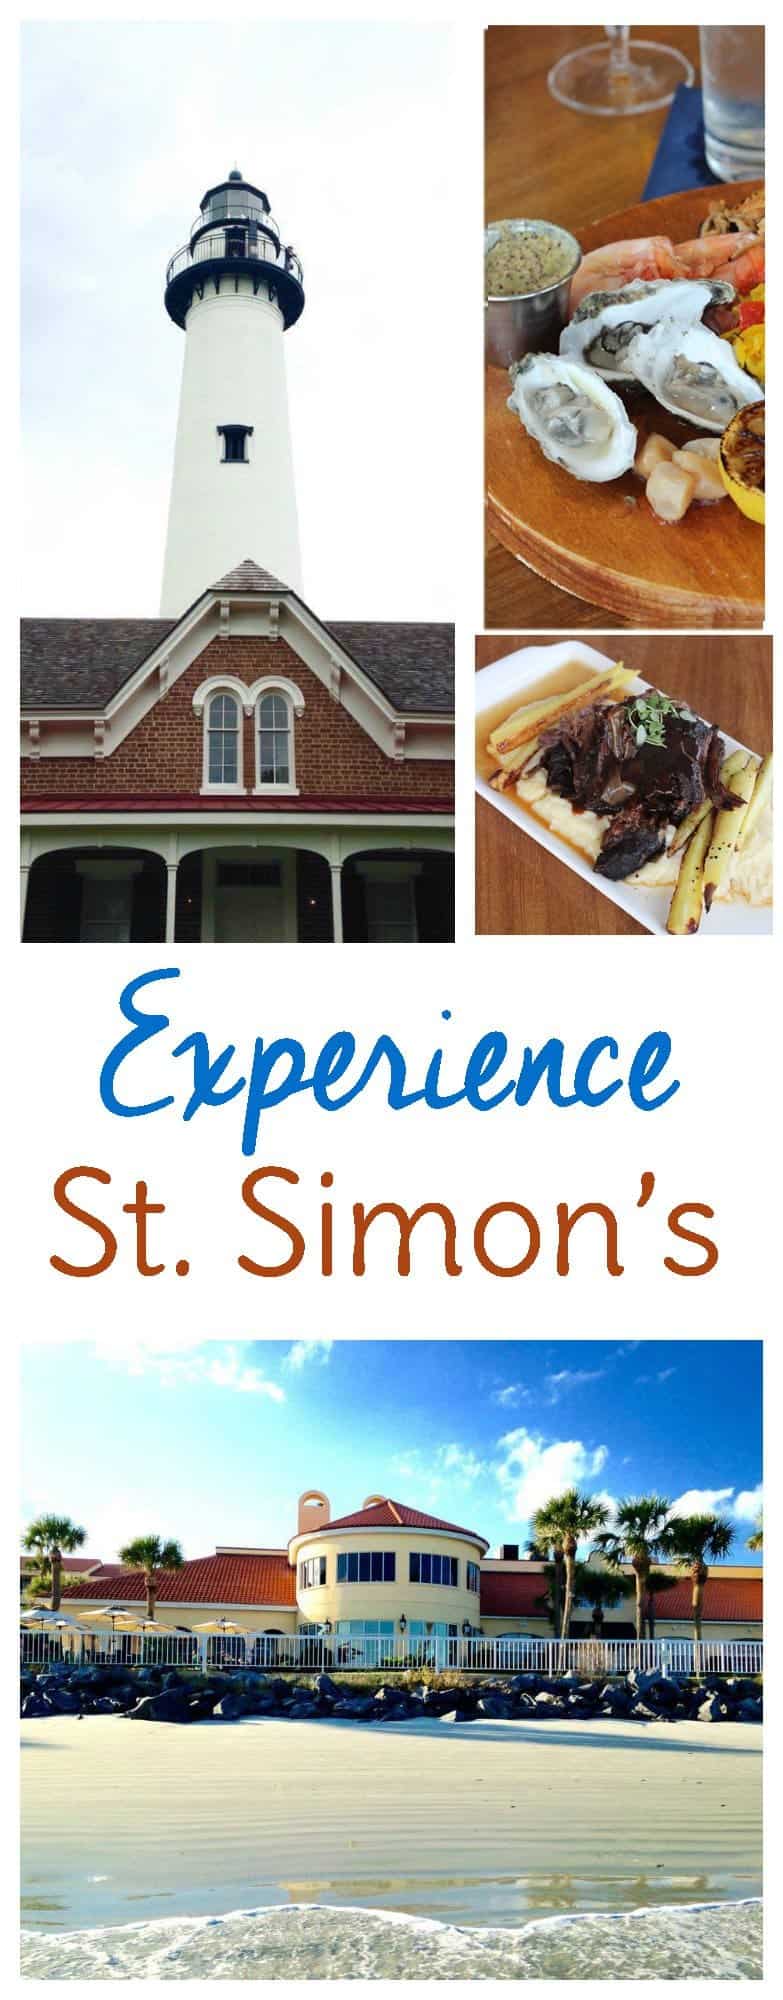 Travel to St. Simon's Island: Things to do on St. Simon's Island as well as where to eat and stay during your Golden Isles vacation.